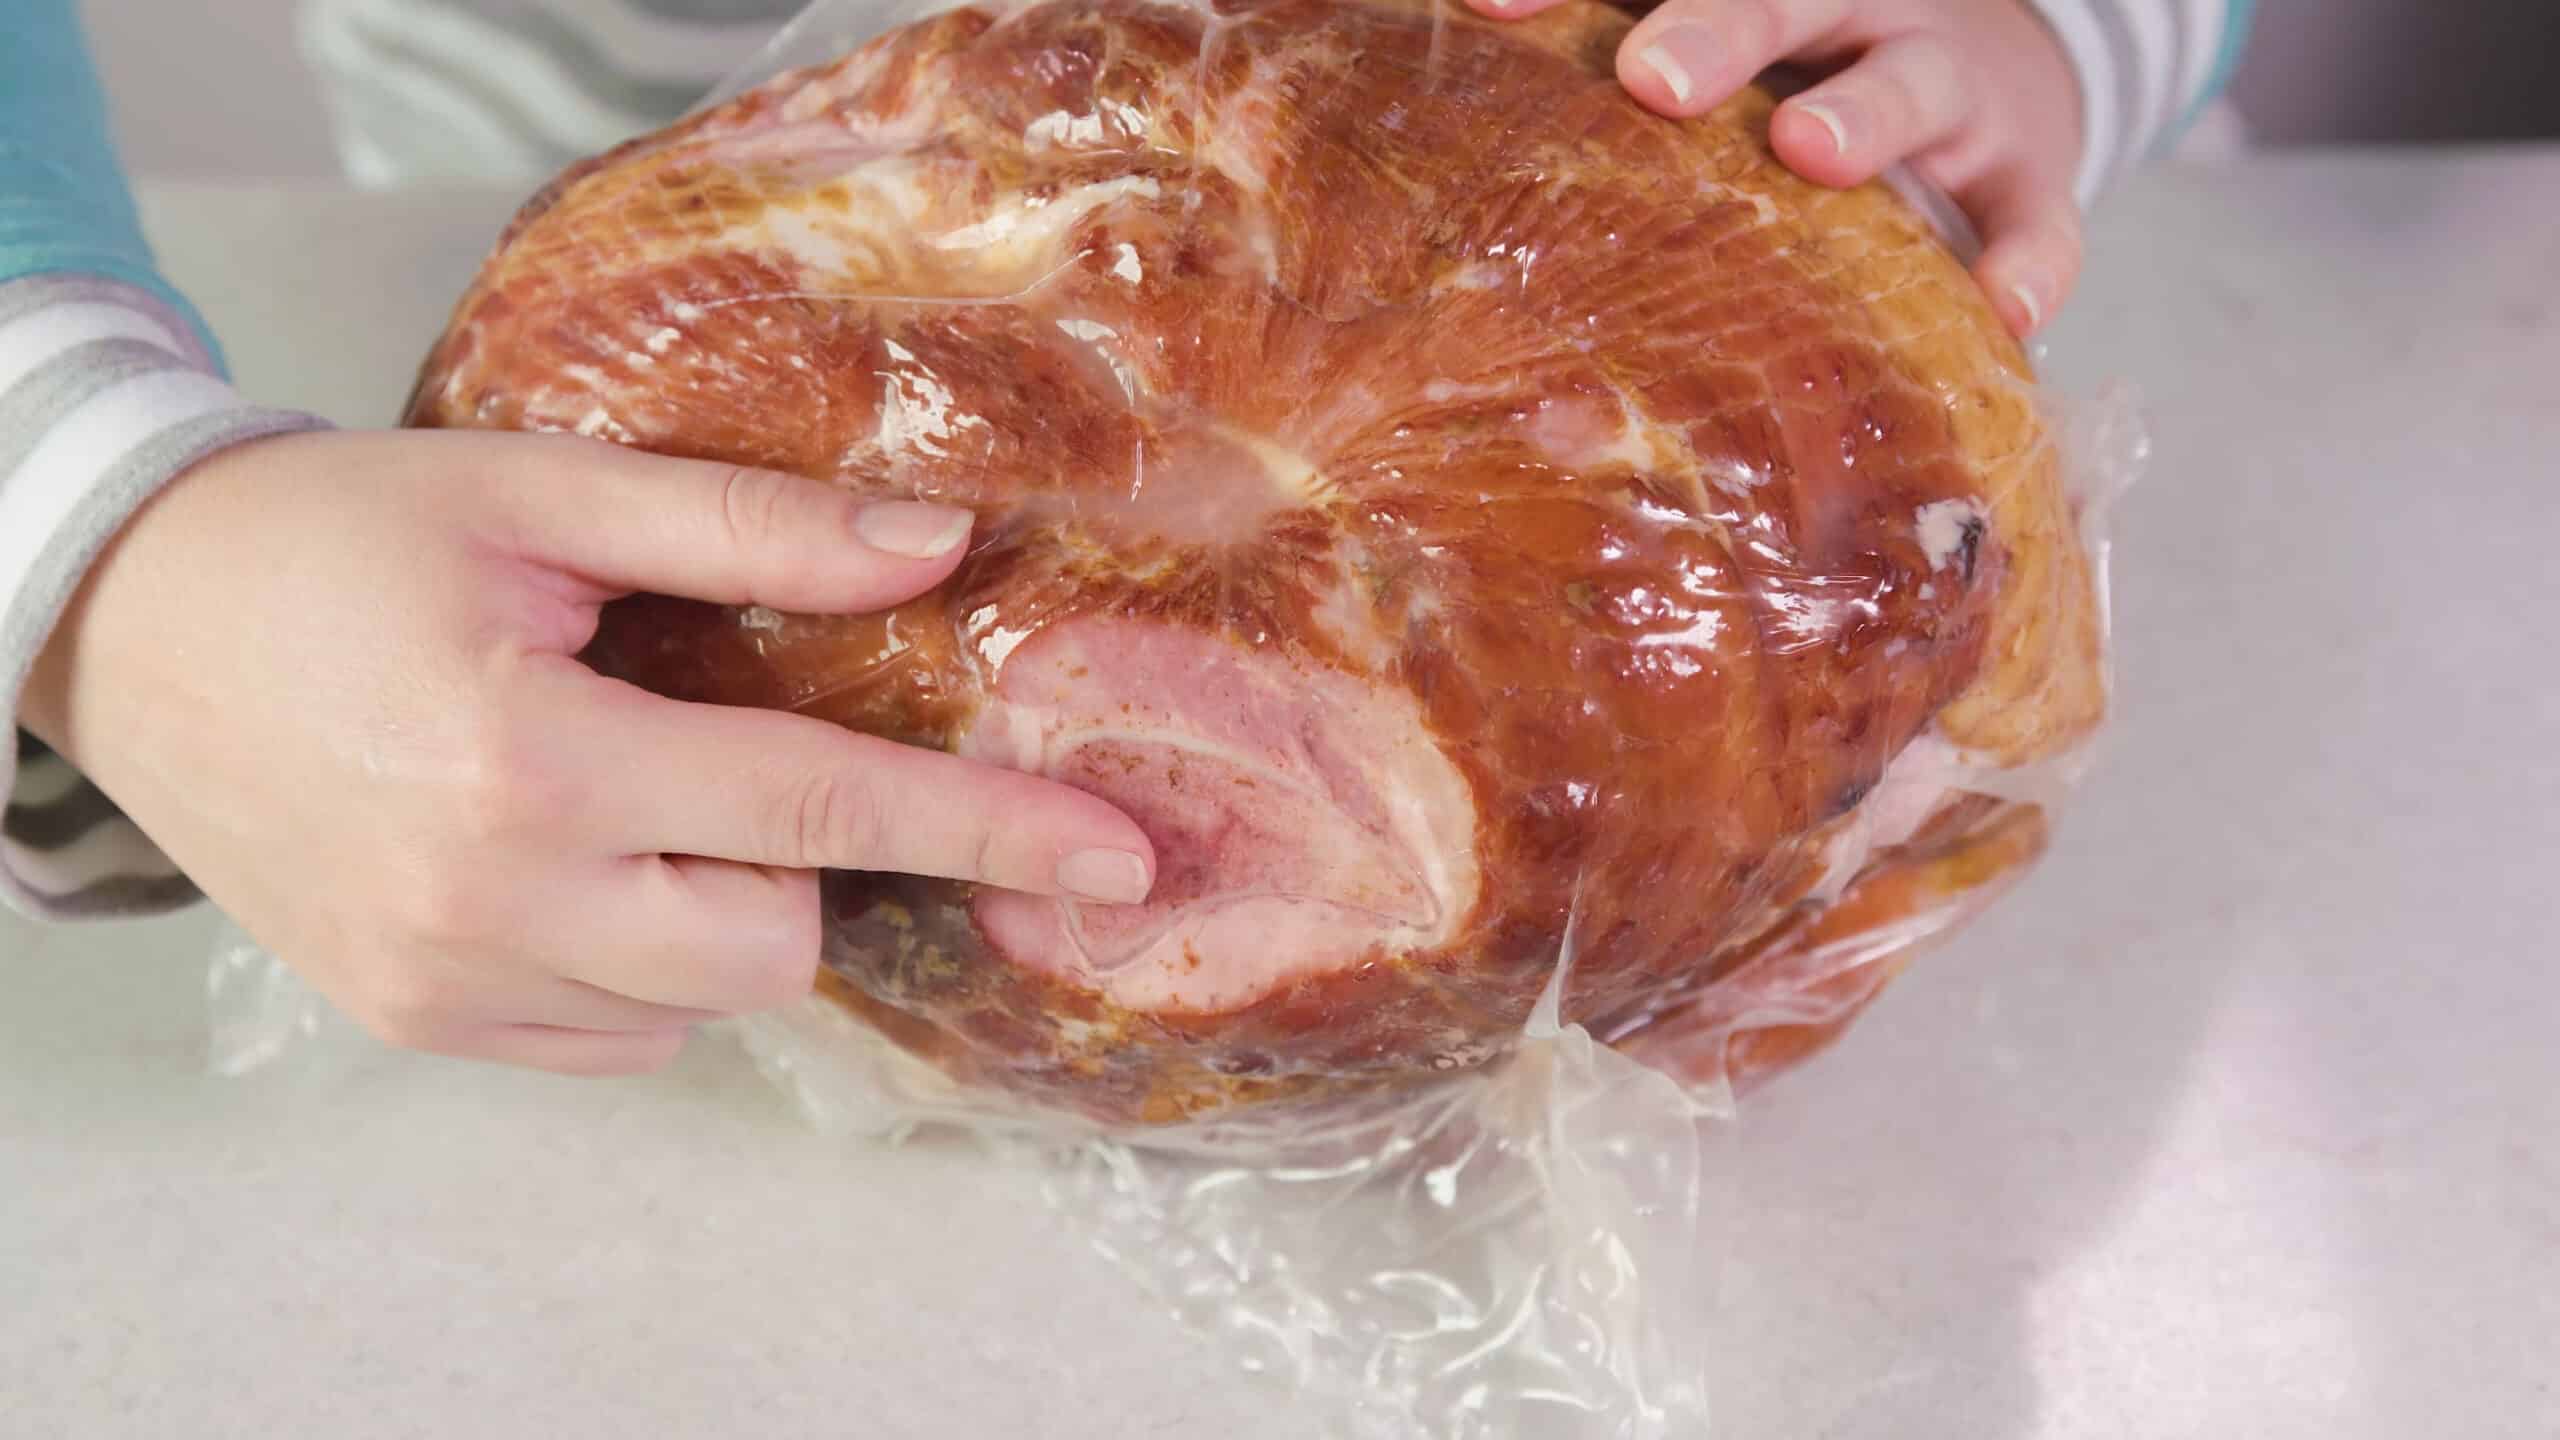 Close-up view of the side of vacuum plastic sealed ham and pointing out the "bone-in" portion of this particular cut of meat.